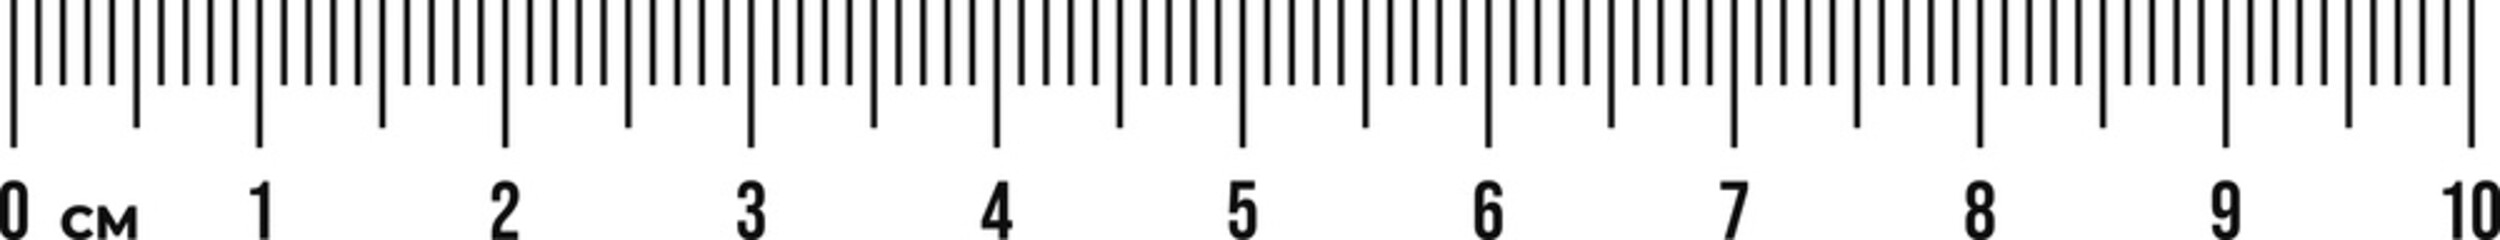 Ruler scale 10 cm. Centimeter scale for measuring